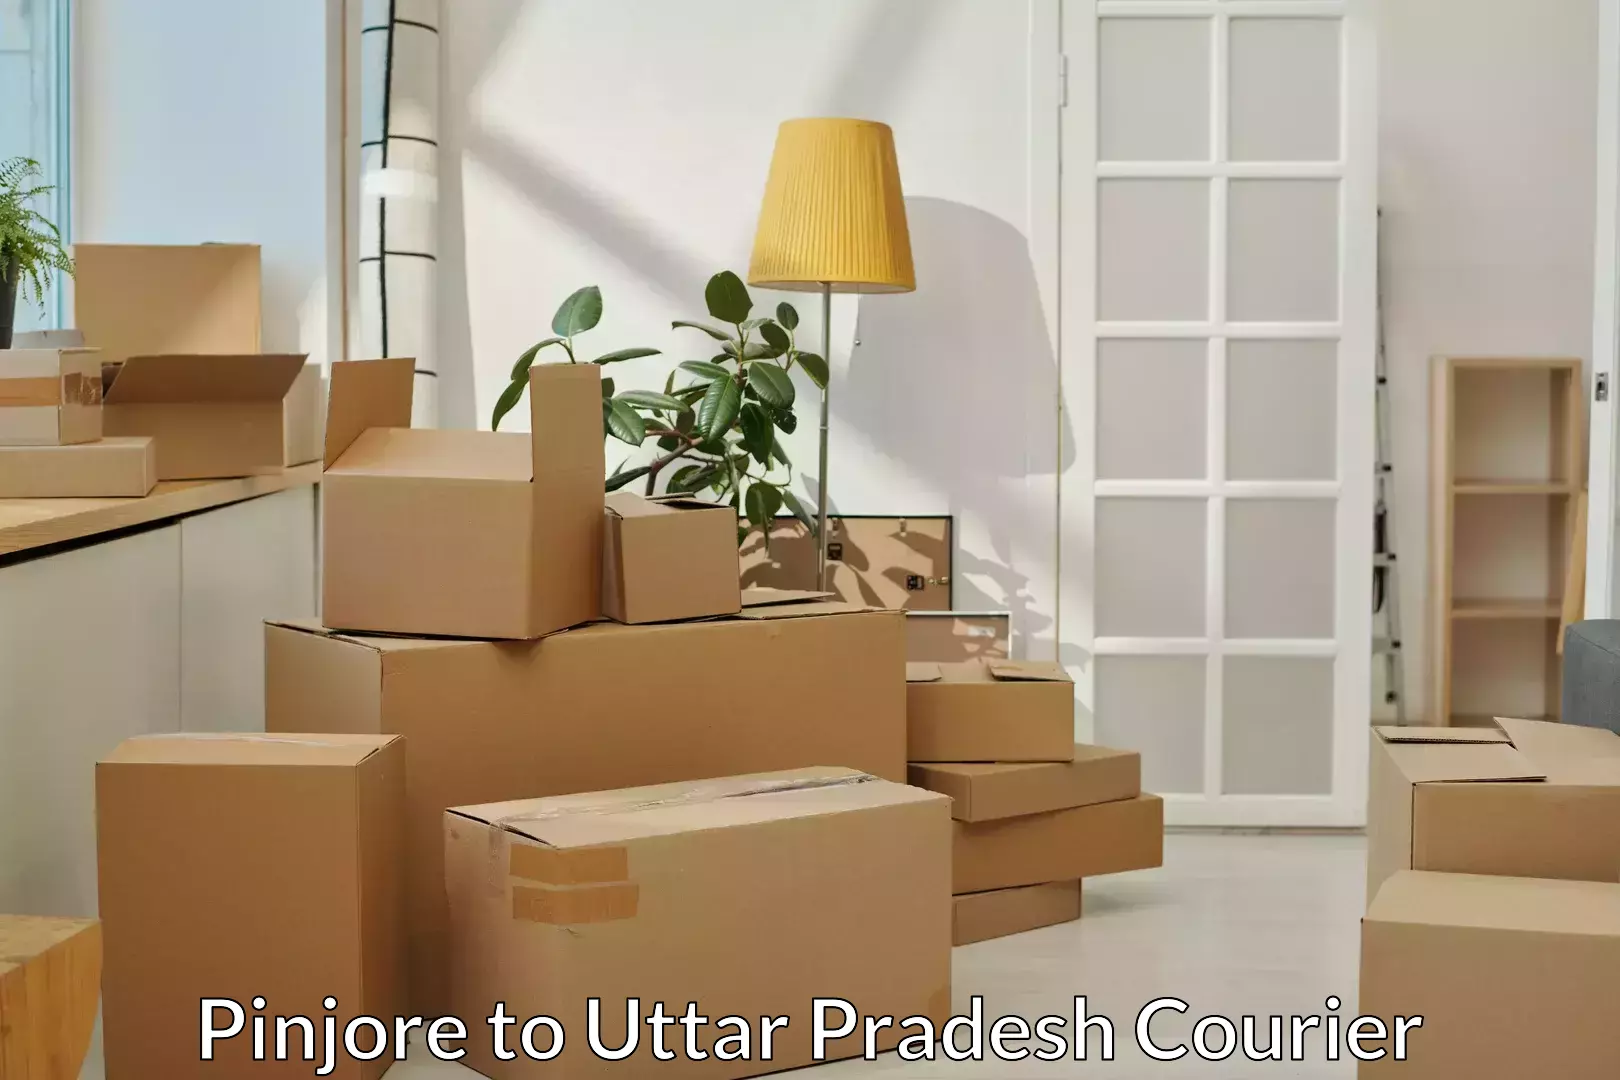 Furniture transport experts Pinjore to Sitapur